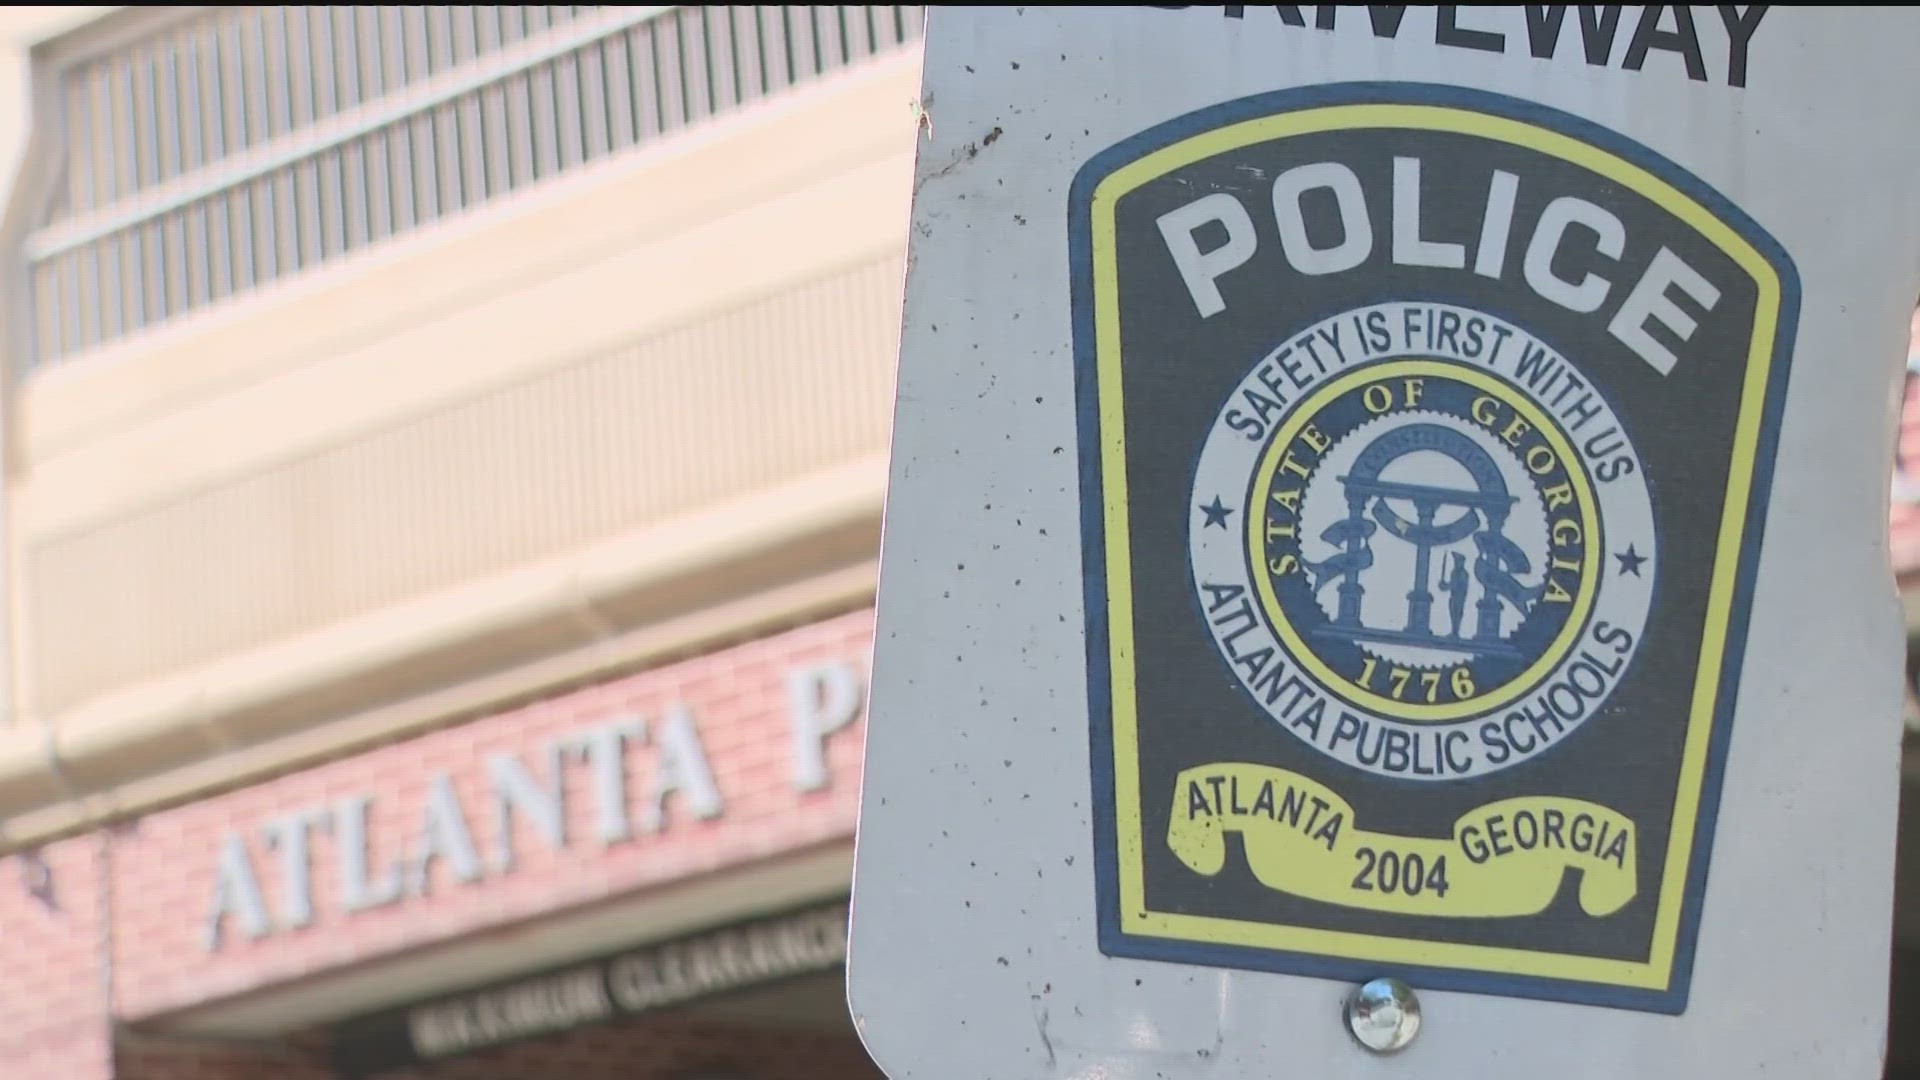 As students head back to school next, the Atlanta Public Schools Police Department will have another tool to combat gang activity and recruiting within their schools